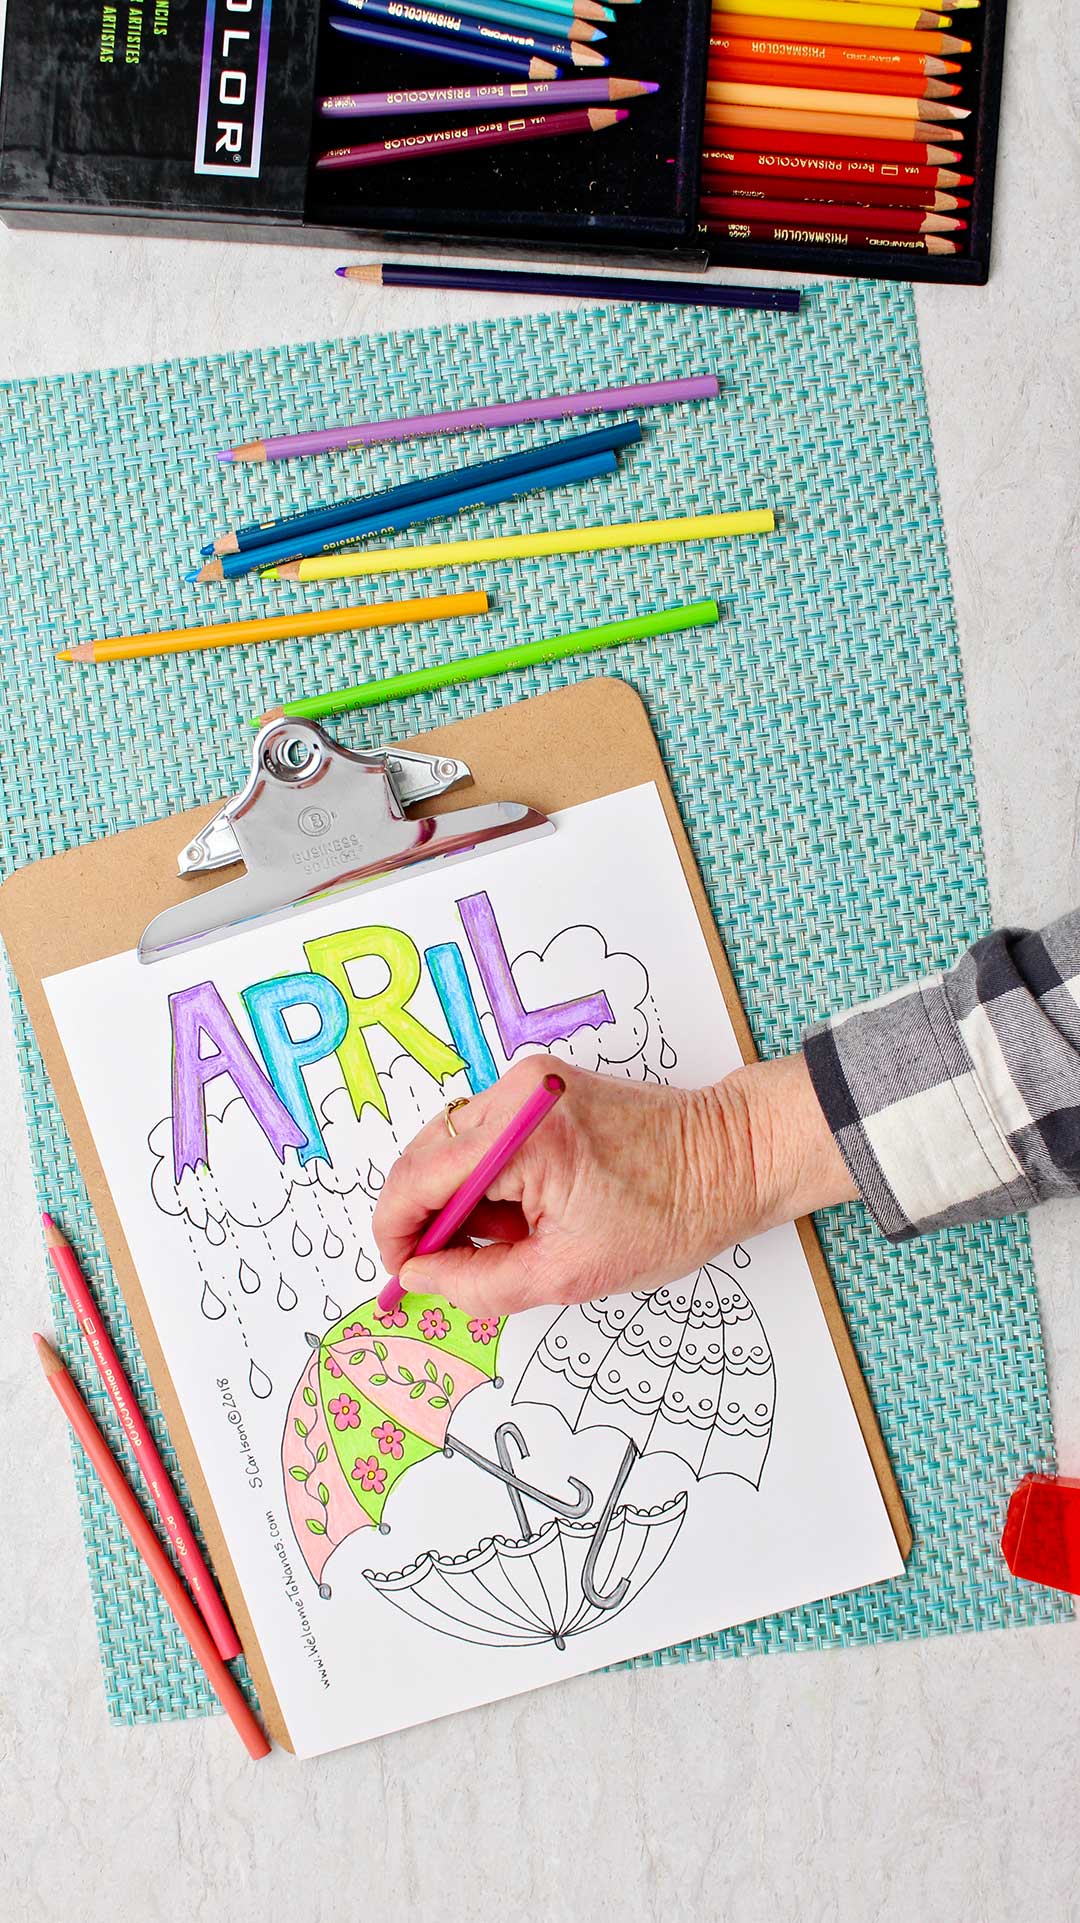 Hand coloring flowers on an umbrella pink in the April Showers Coloring Page sitting on an aqua placemat with colored pencils around.